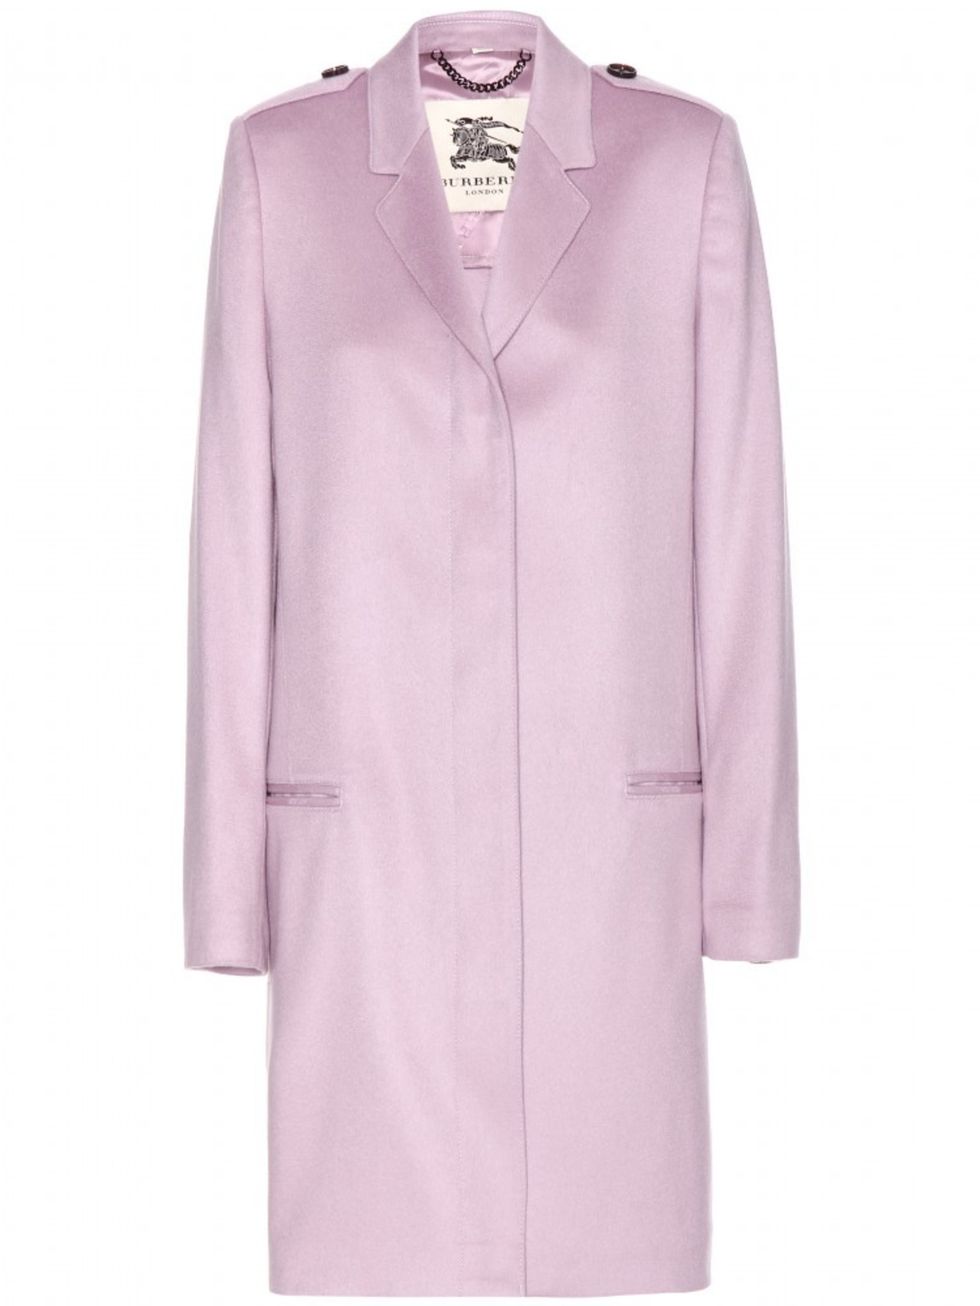 <p>Lilac is the new black (don't you know).</p>

<p>Burberry coat, £1,495, from <a href="http://www.mytheresa.com/en-gb/inverhill-cashmere-coat.html">My-theresa.com</a><br />
 </p>